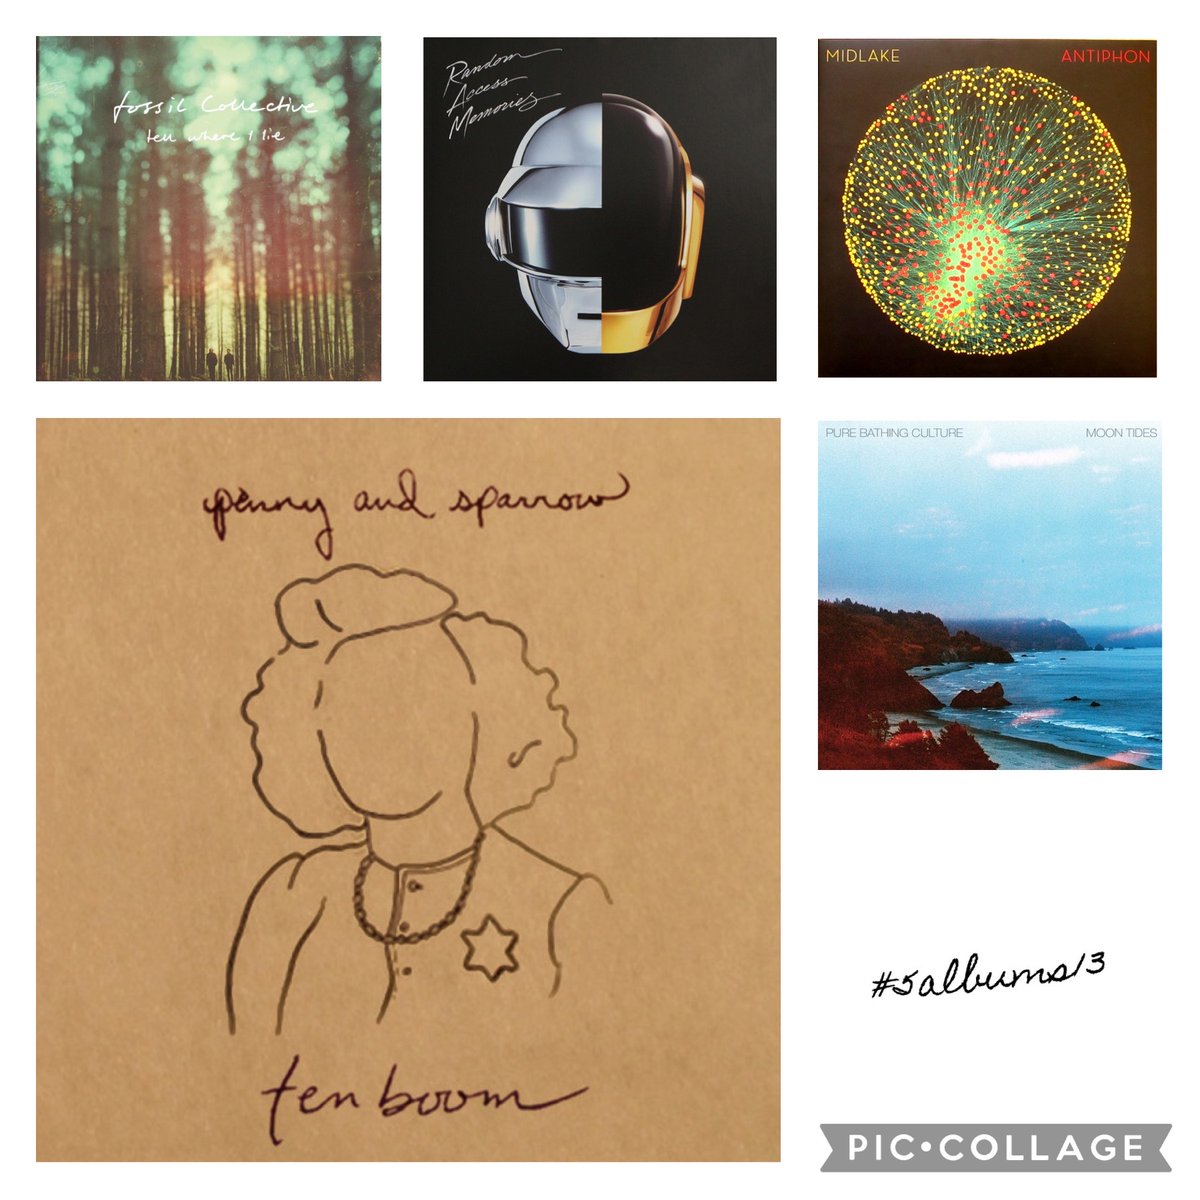 #5albums13

Hi Richard

1. Tenboom, Penny And Sparrow
2. Tell Where I Lie, Fossil Collective
3. Random Access Memories, Daft Punk
4. Antiphon, Midlake
5. Moon Tides, Pure Bathing Culture

A really strong year. I’d started to collect new vinyl again and it shows!

Thanks 😊